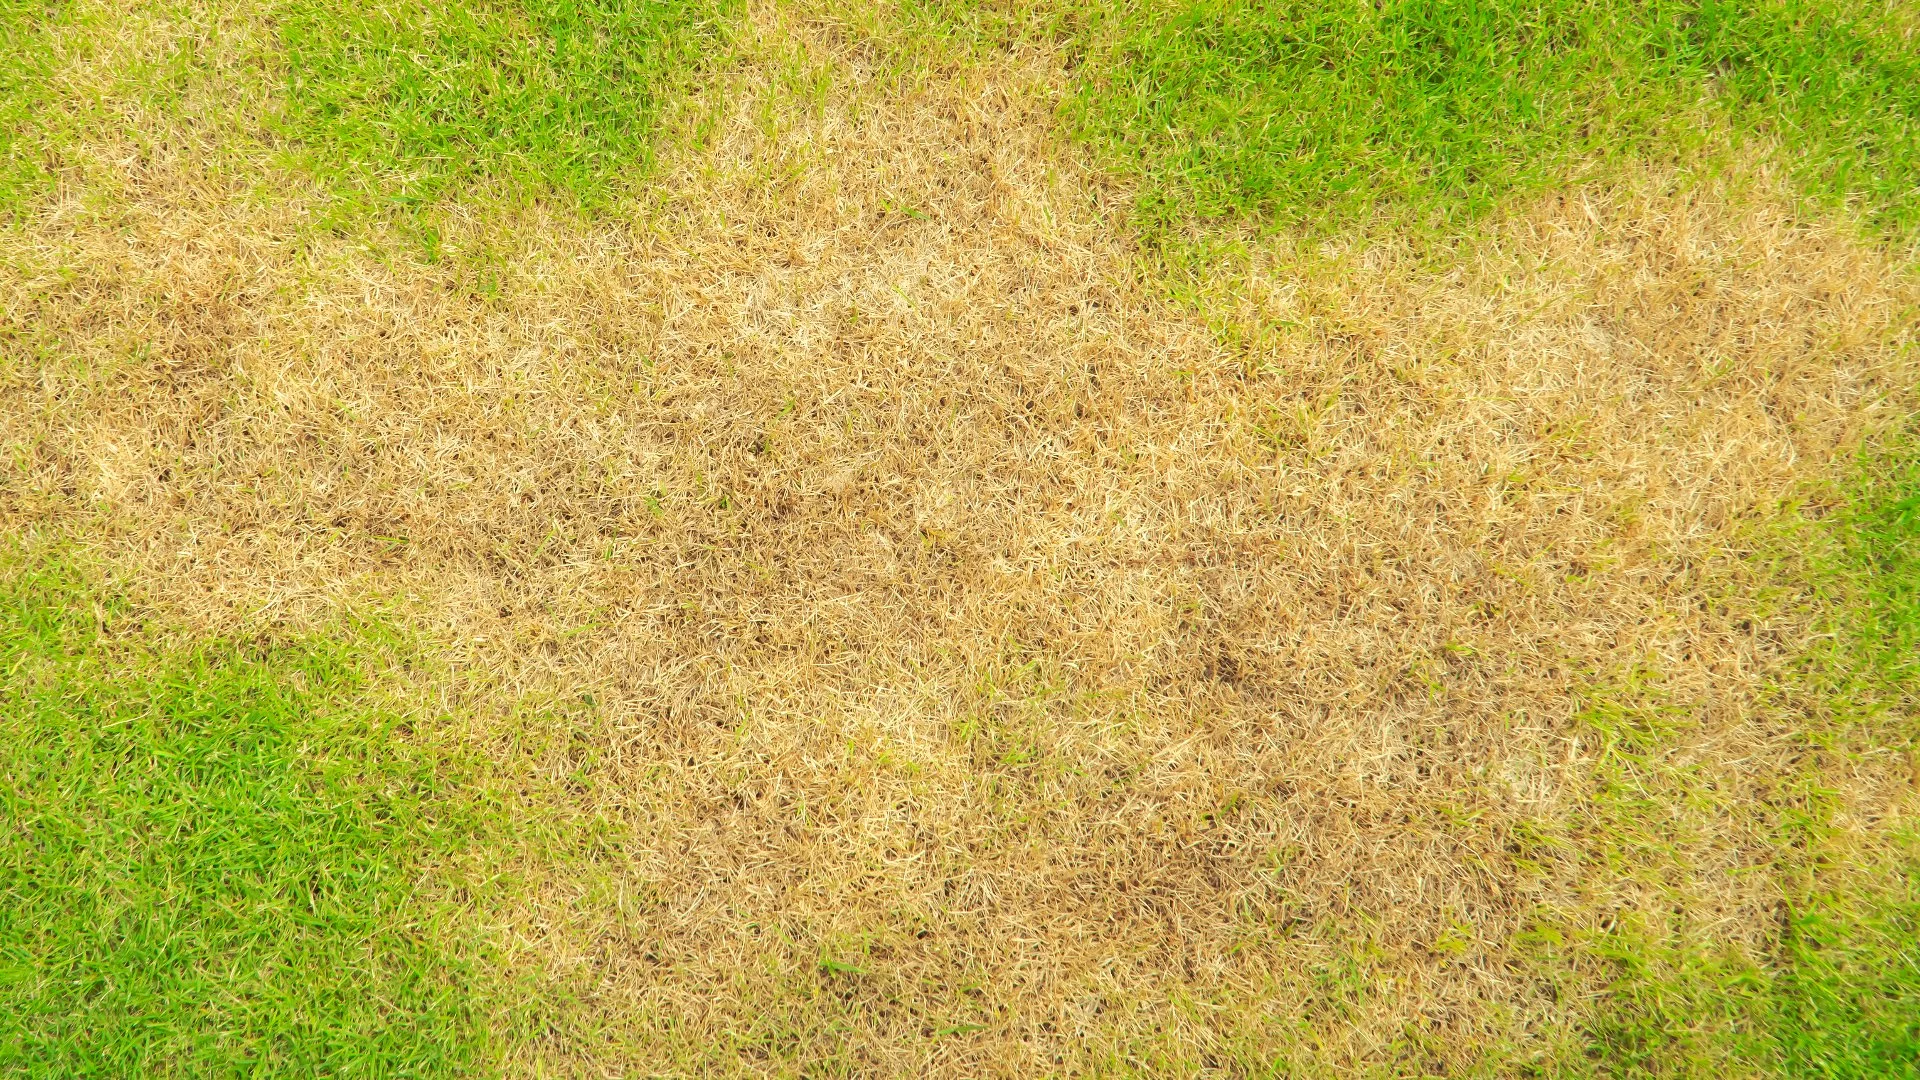 Is Your Grass Brown? Here Are Some Possible Causes & Lawn Care Solutions